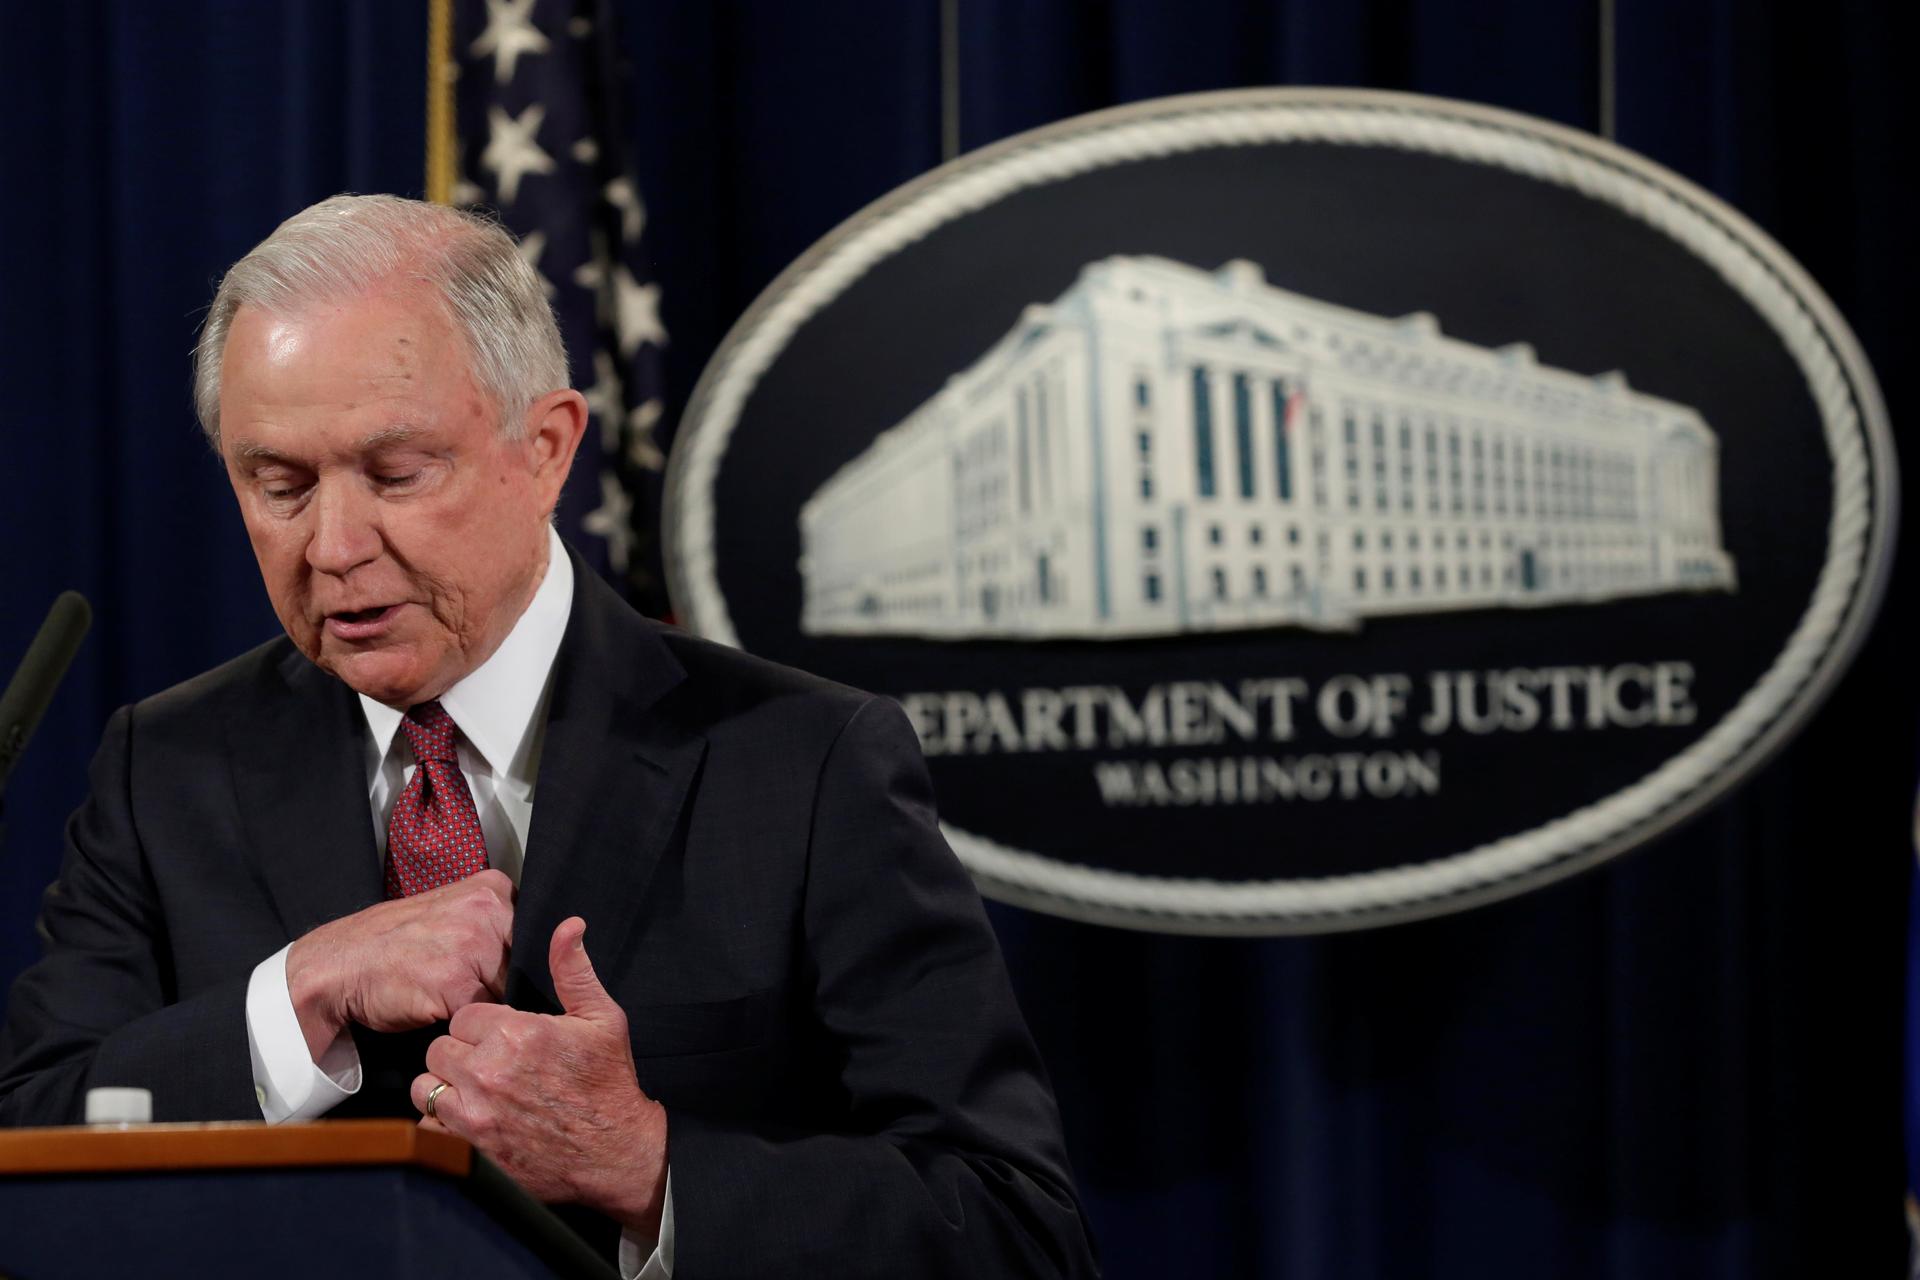 Man at podium with Department of Justice insignia behind him